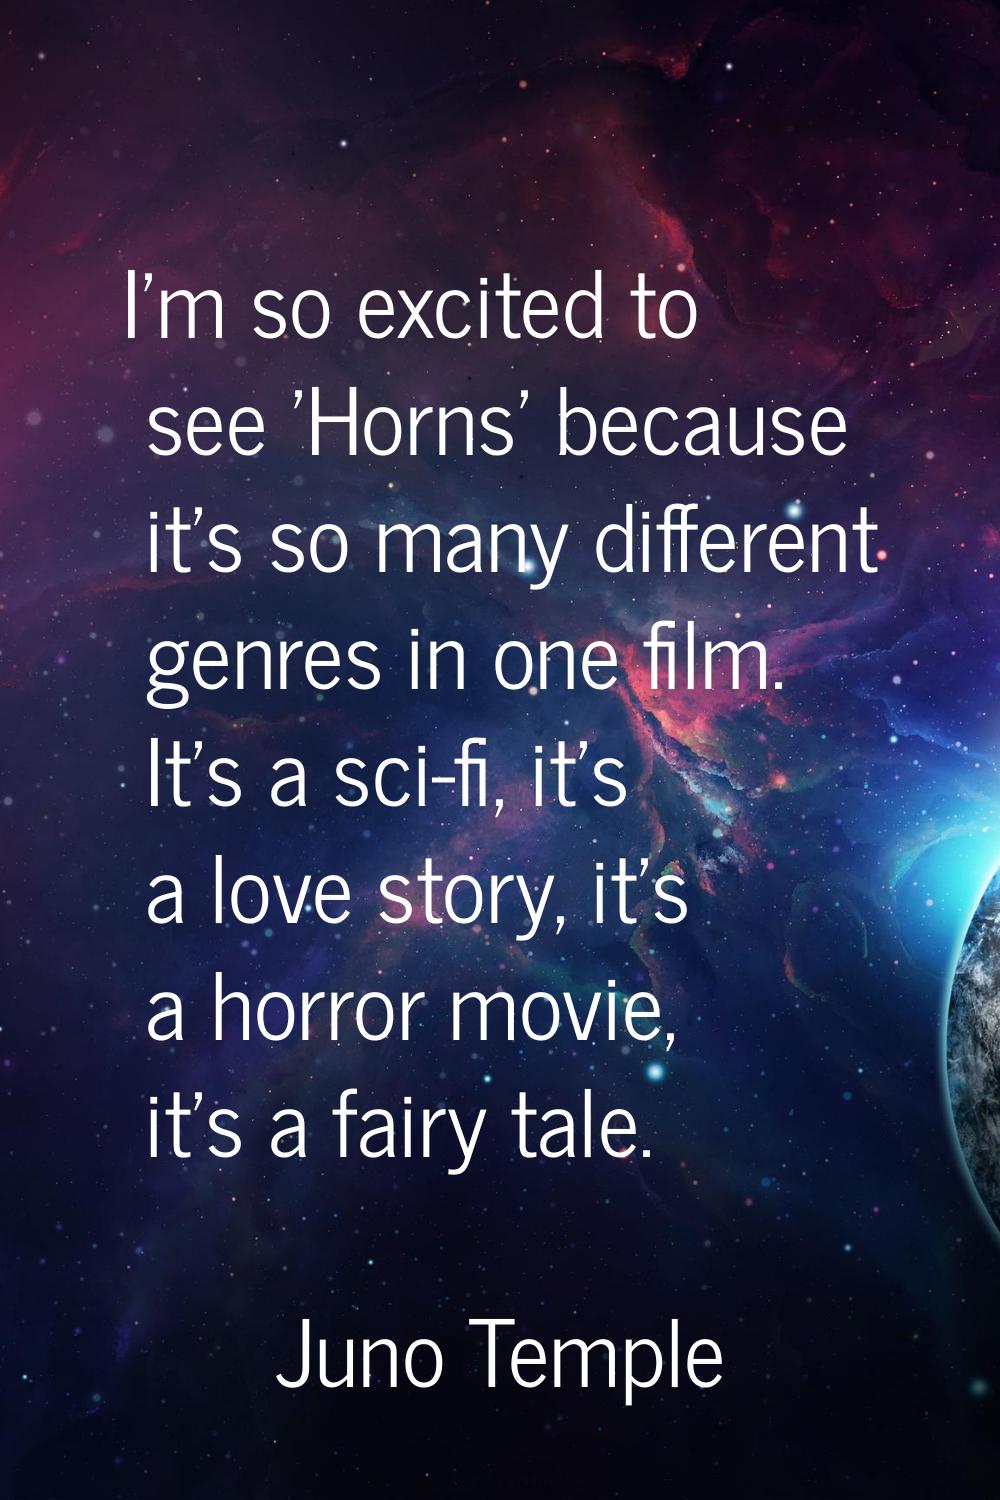 I'm so excited to see 'Horns' because it's so many different genres in one film. It's a sci-fi, it'